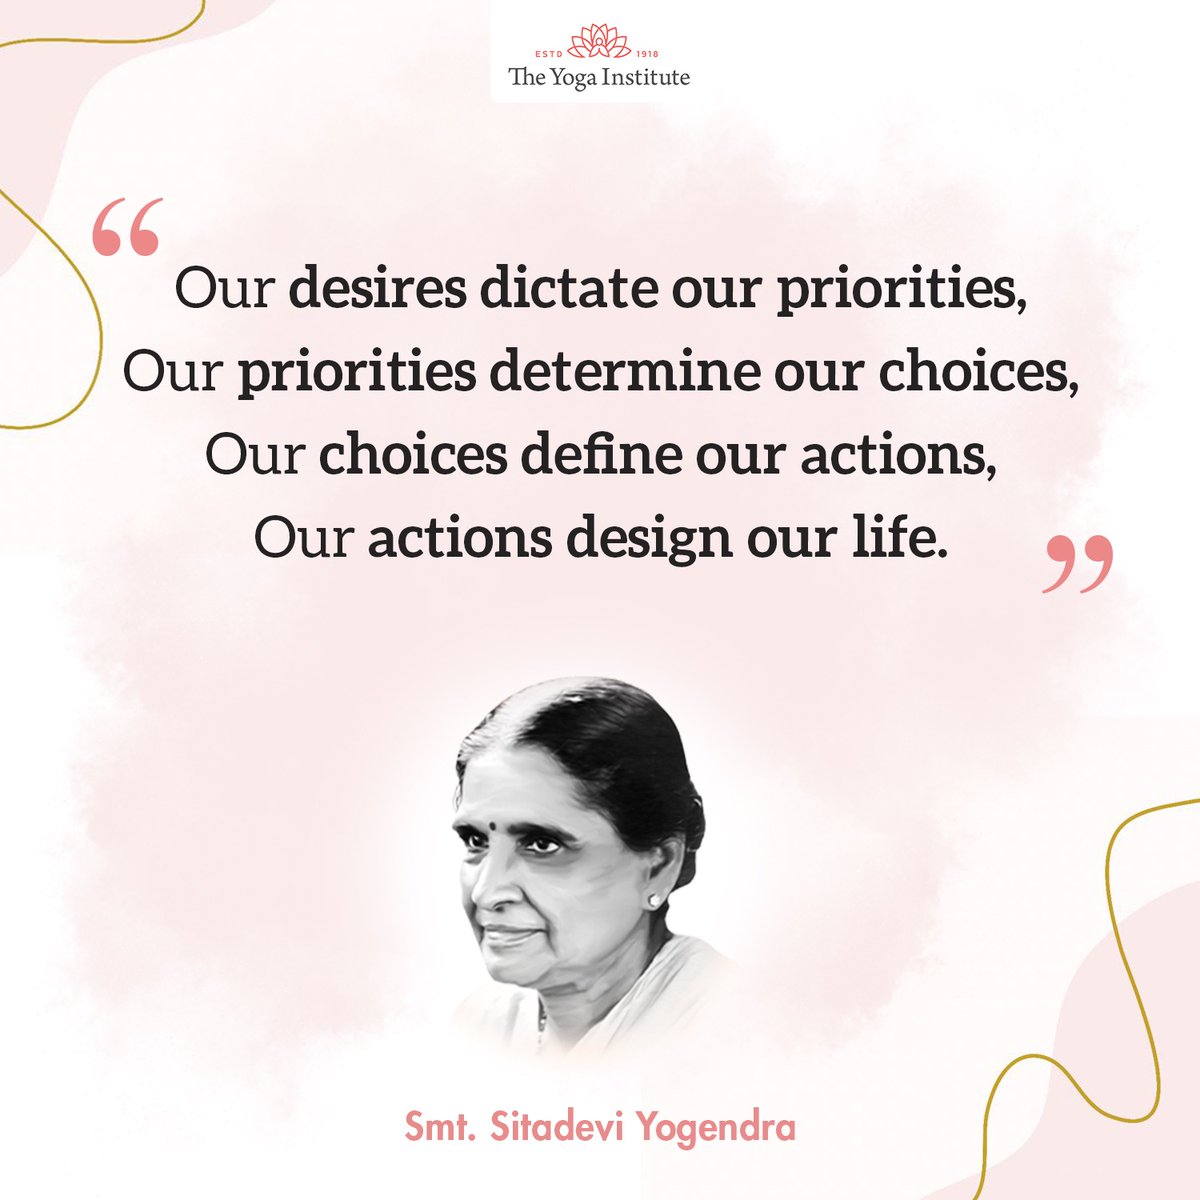 Our desires set the compass for our priorities, which navigate our choices. These choices become the brushstrokes that paint the canvas of our actions, ultimately crafting the masterpiece of our lives.

#theyogainstitute #DrHansaji #desires #dedication #priorities #determination